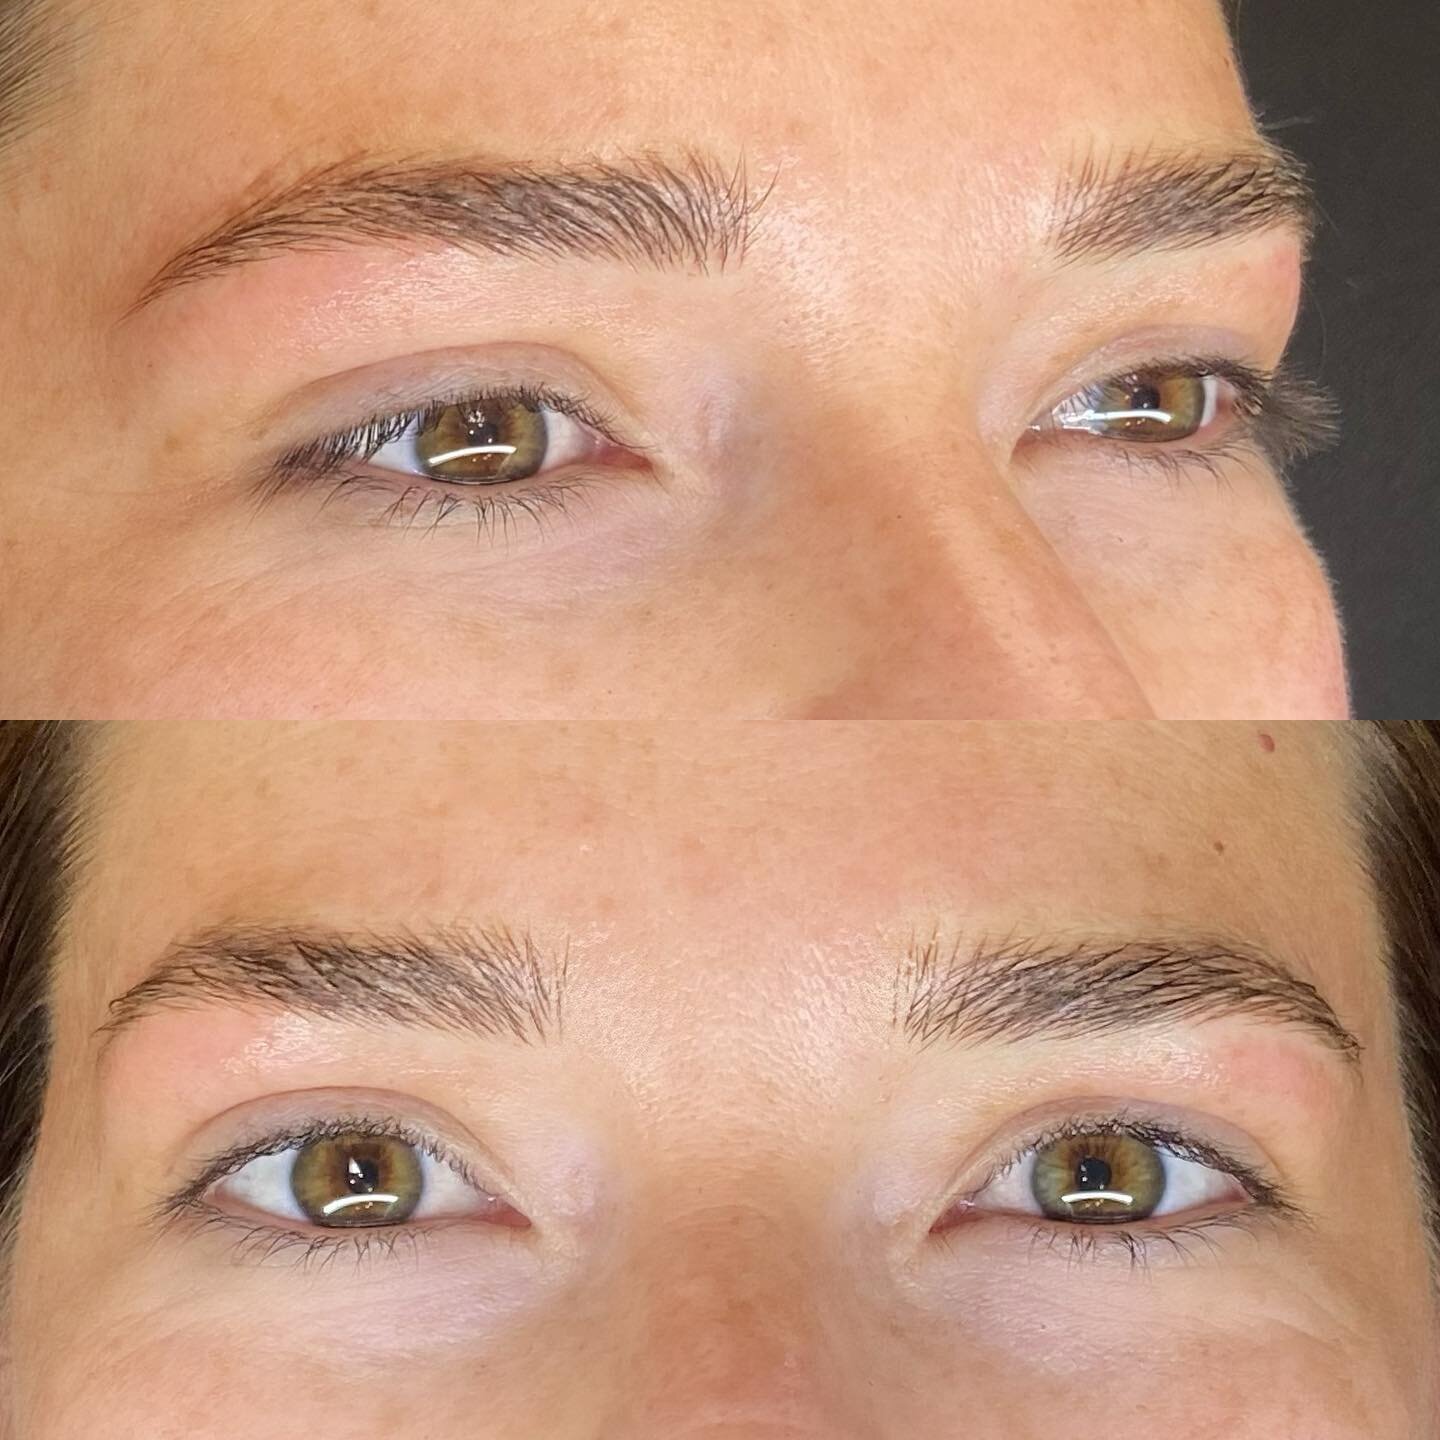 The most subtle enhancements are my fave! First session of microblading on this pretty lady. Swipe for to see what we started with. ✌️
.
.
.
.

#3dbrows #hairstrokebrows #featherstrokebrows #microbladingslc #3dbrowsslc #microbladingutah #powderbrow #